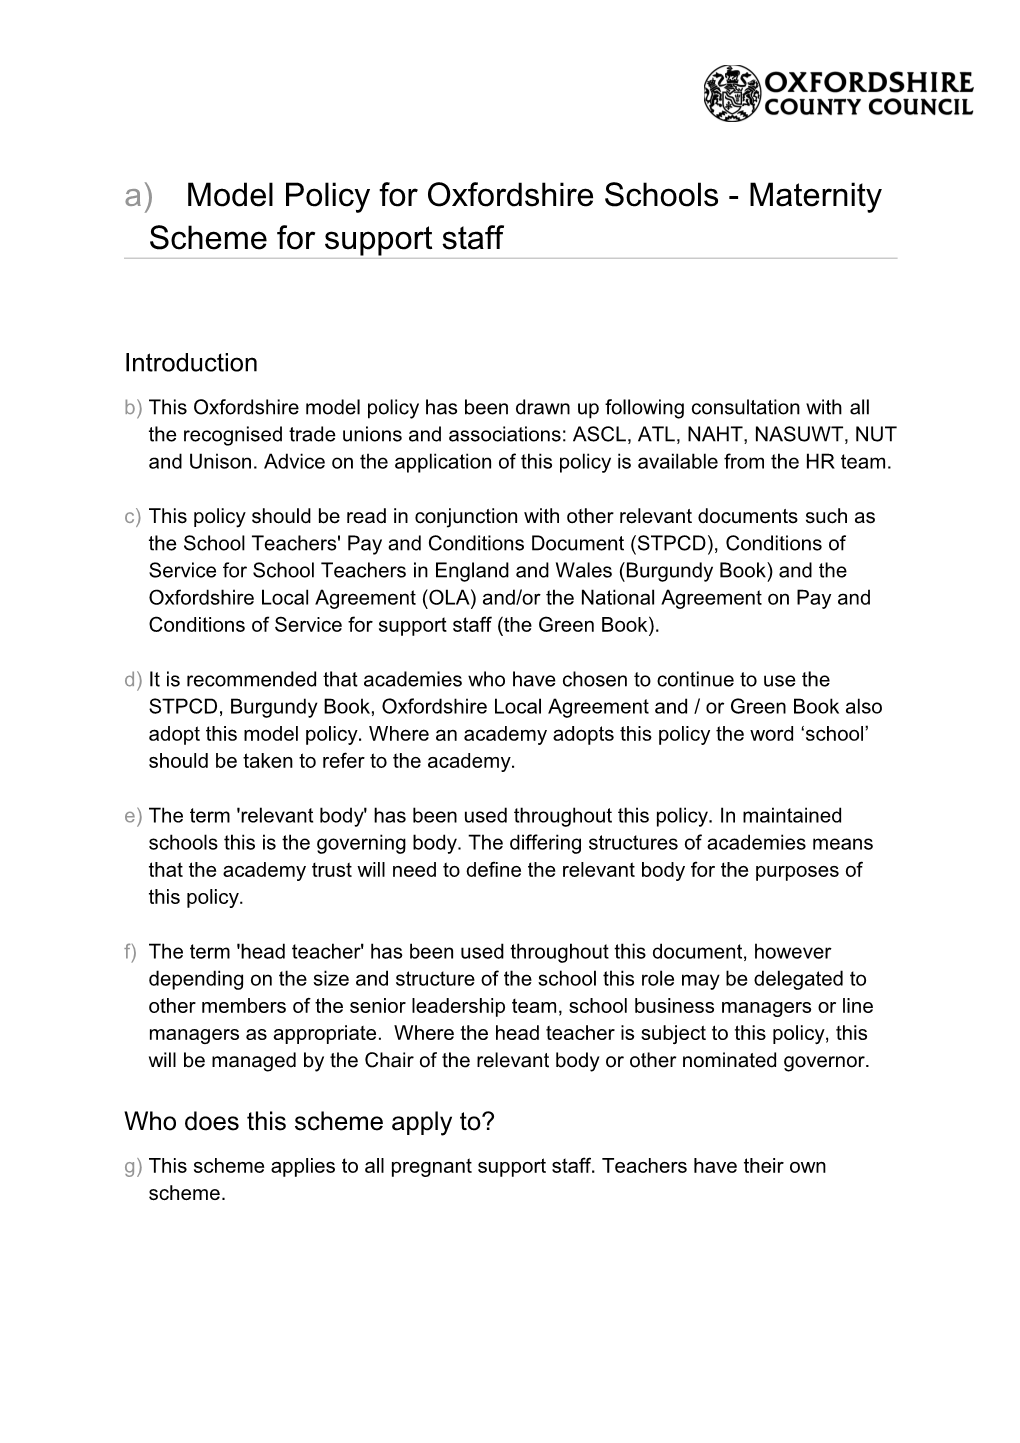 Model Policy for Oxfordshire Schools - Maternity Scheme for Support Staff